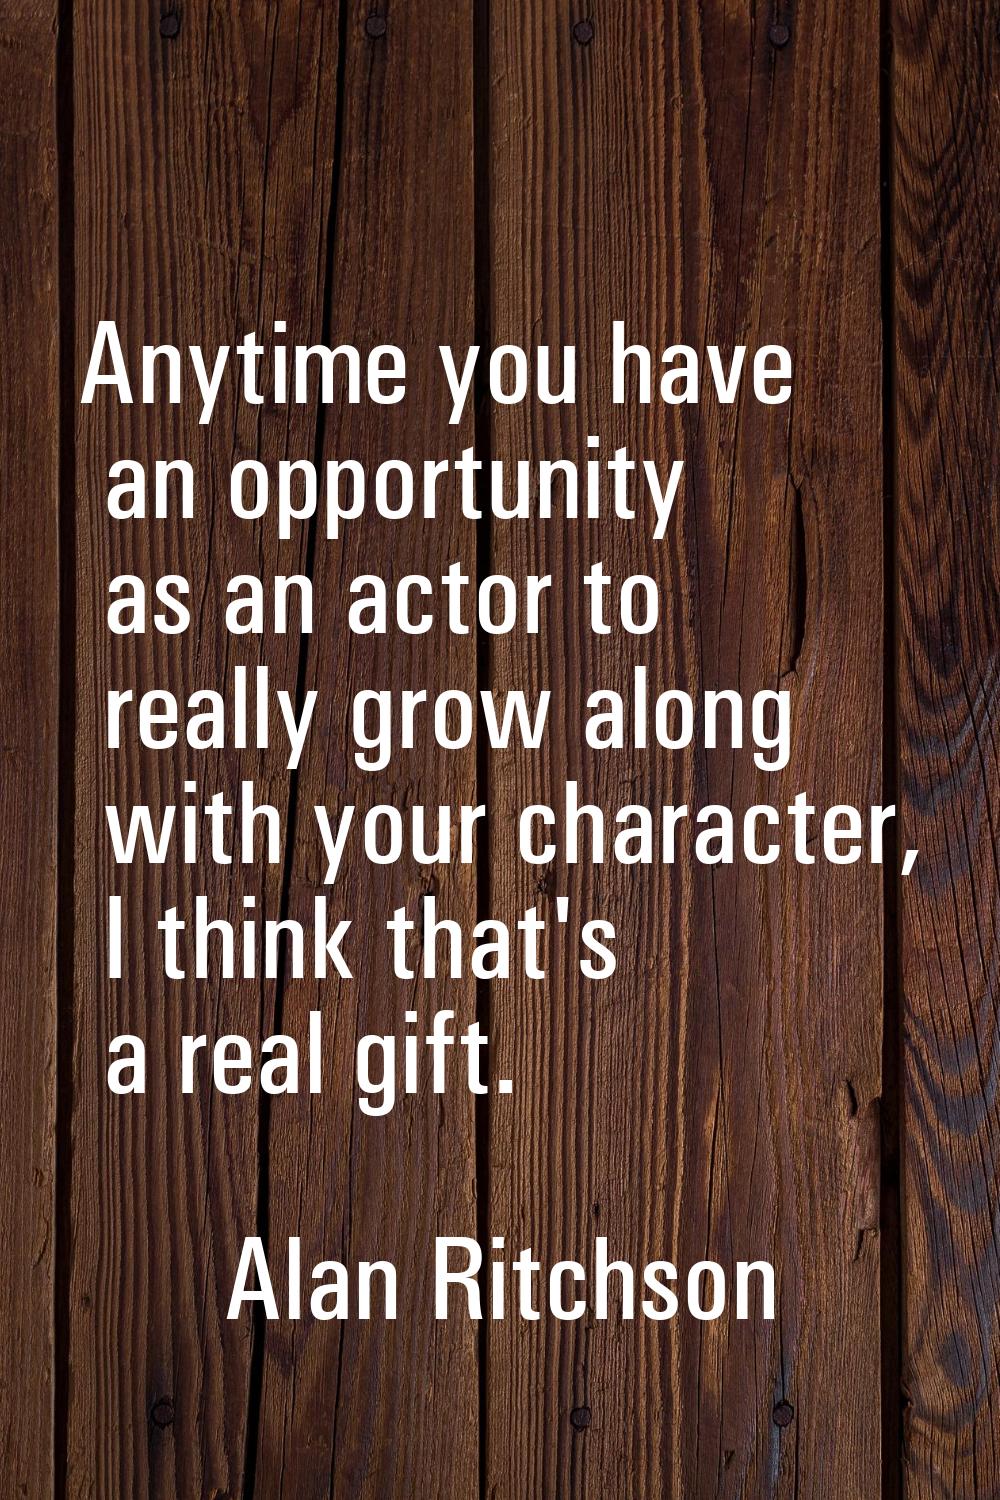 Anytime you have an opportunity as an actor to really grow along with your character, I think that'